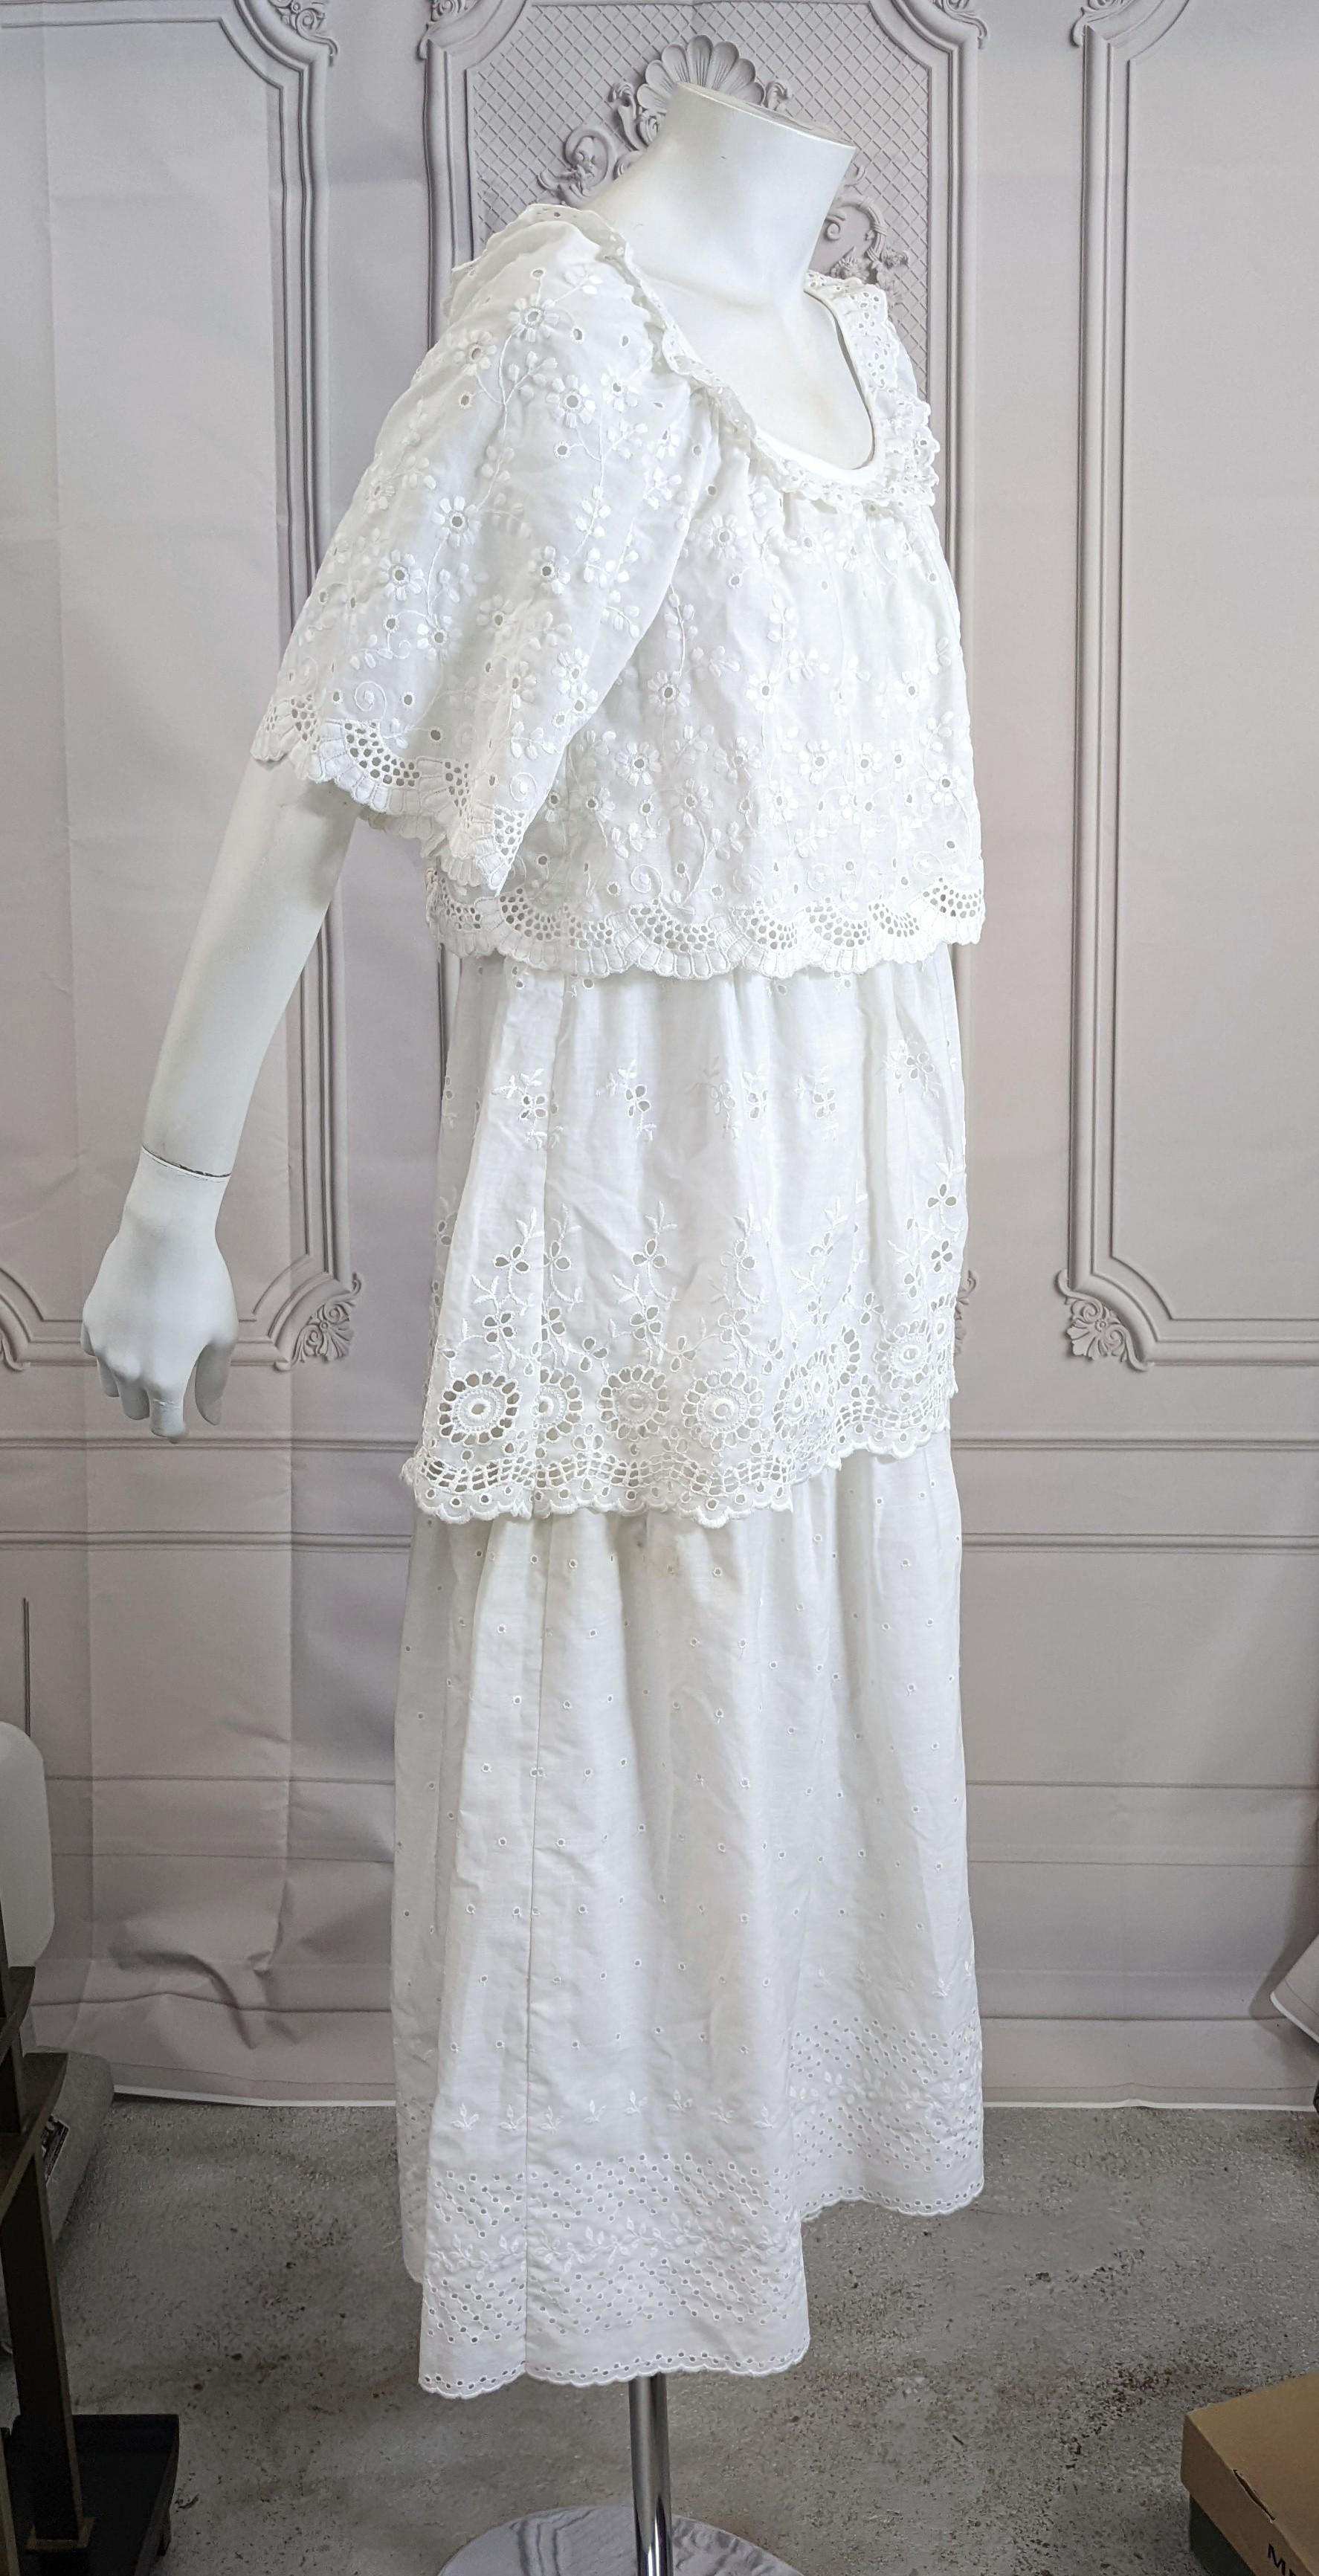 Gil Ambez Dress Tiered Eyelet Dress In Good Condition For Sale In New York, NY